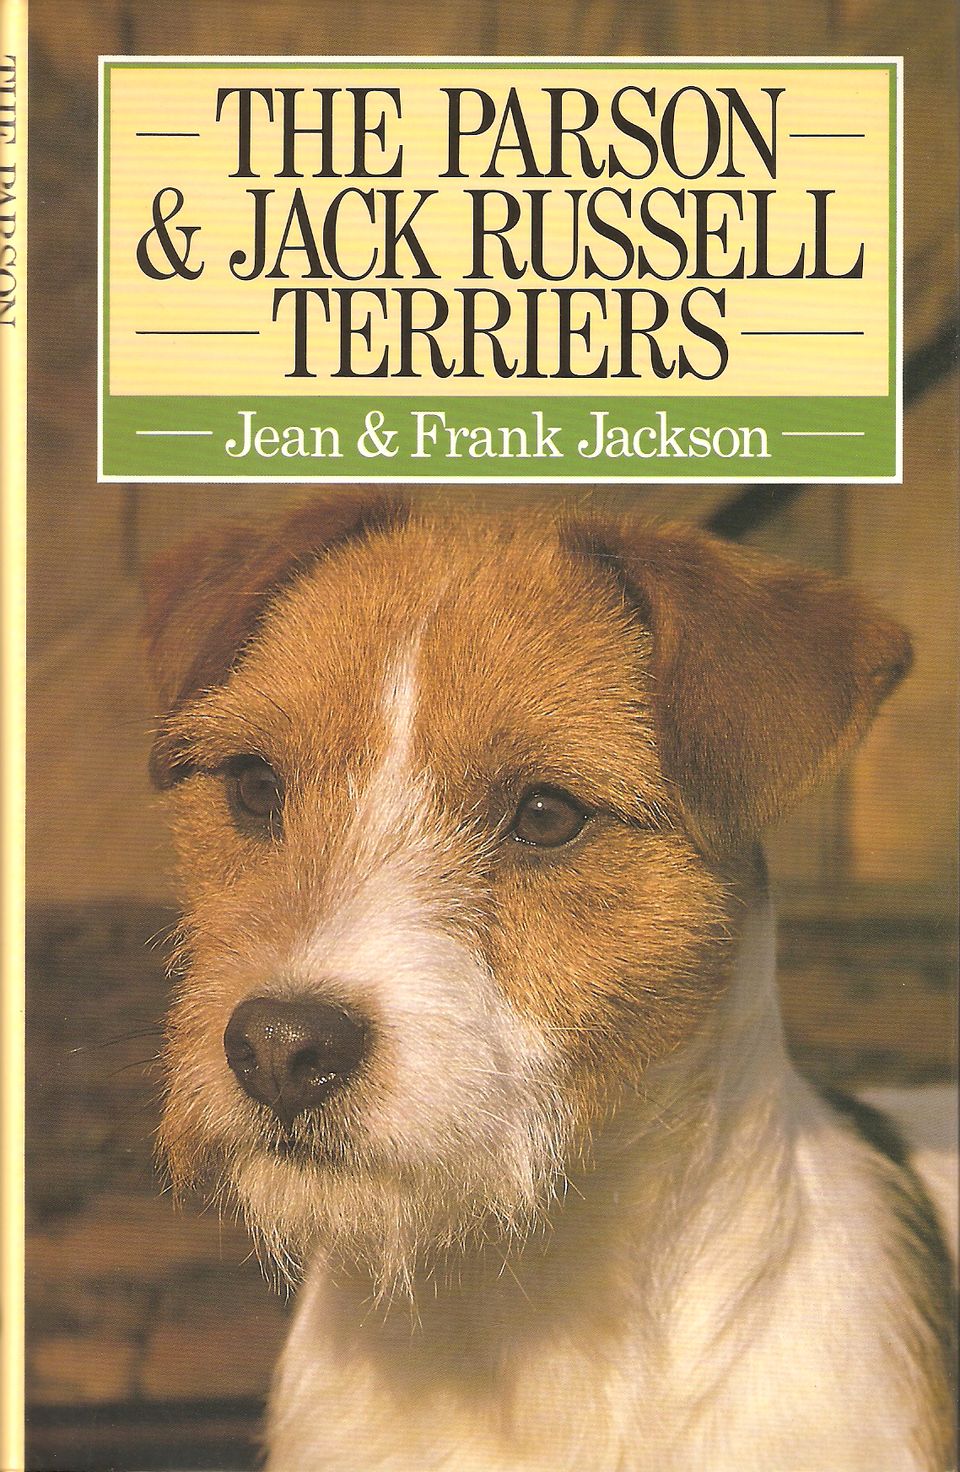 THE PARSON AND JACK RUSSELL TERRIERS. By Jean and Frank Jackson. - Jackson (Jean & Frank).